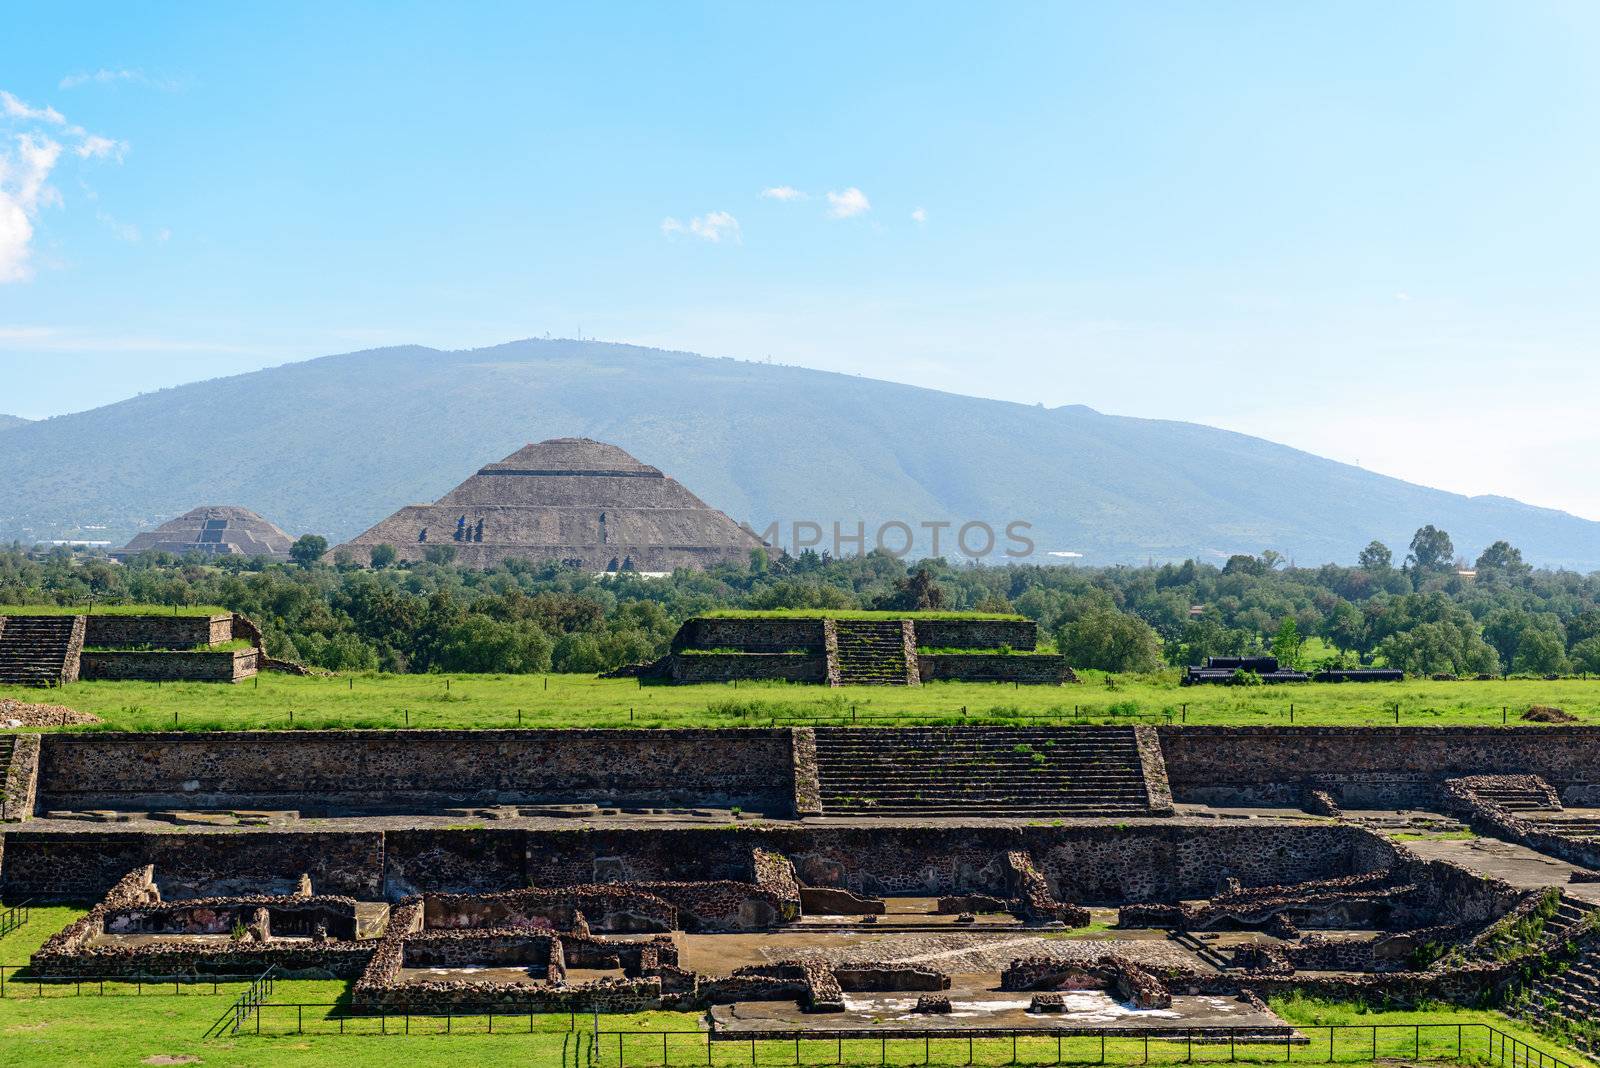 Pyramid of the Moon. City of Teotihuacan near Mexico city. Teotihuacán is an ancient sacred site located 30 miles northeast of Mexico City, Mexico. It is a very popular side trip from Mexico City, and for good reason. The ruins of Teotihuacán are among the most remarkable in Mexico and some of the most important ruins in the world. 